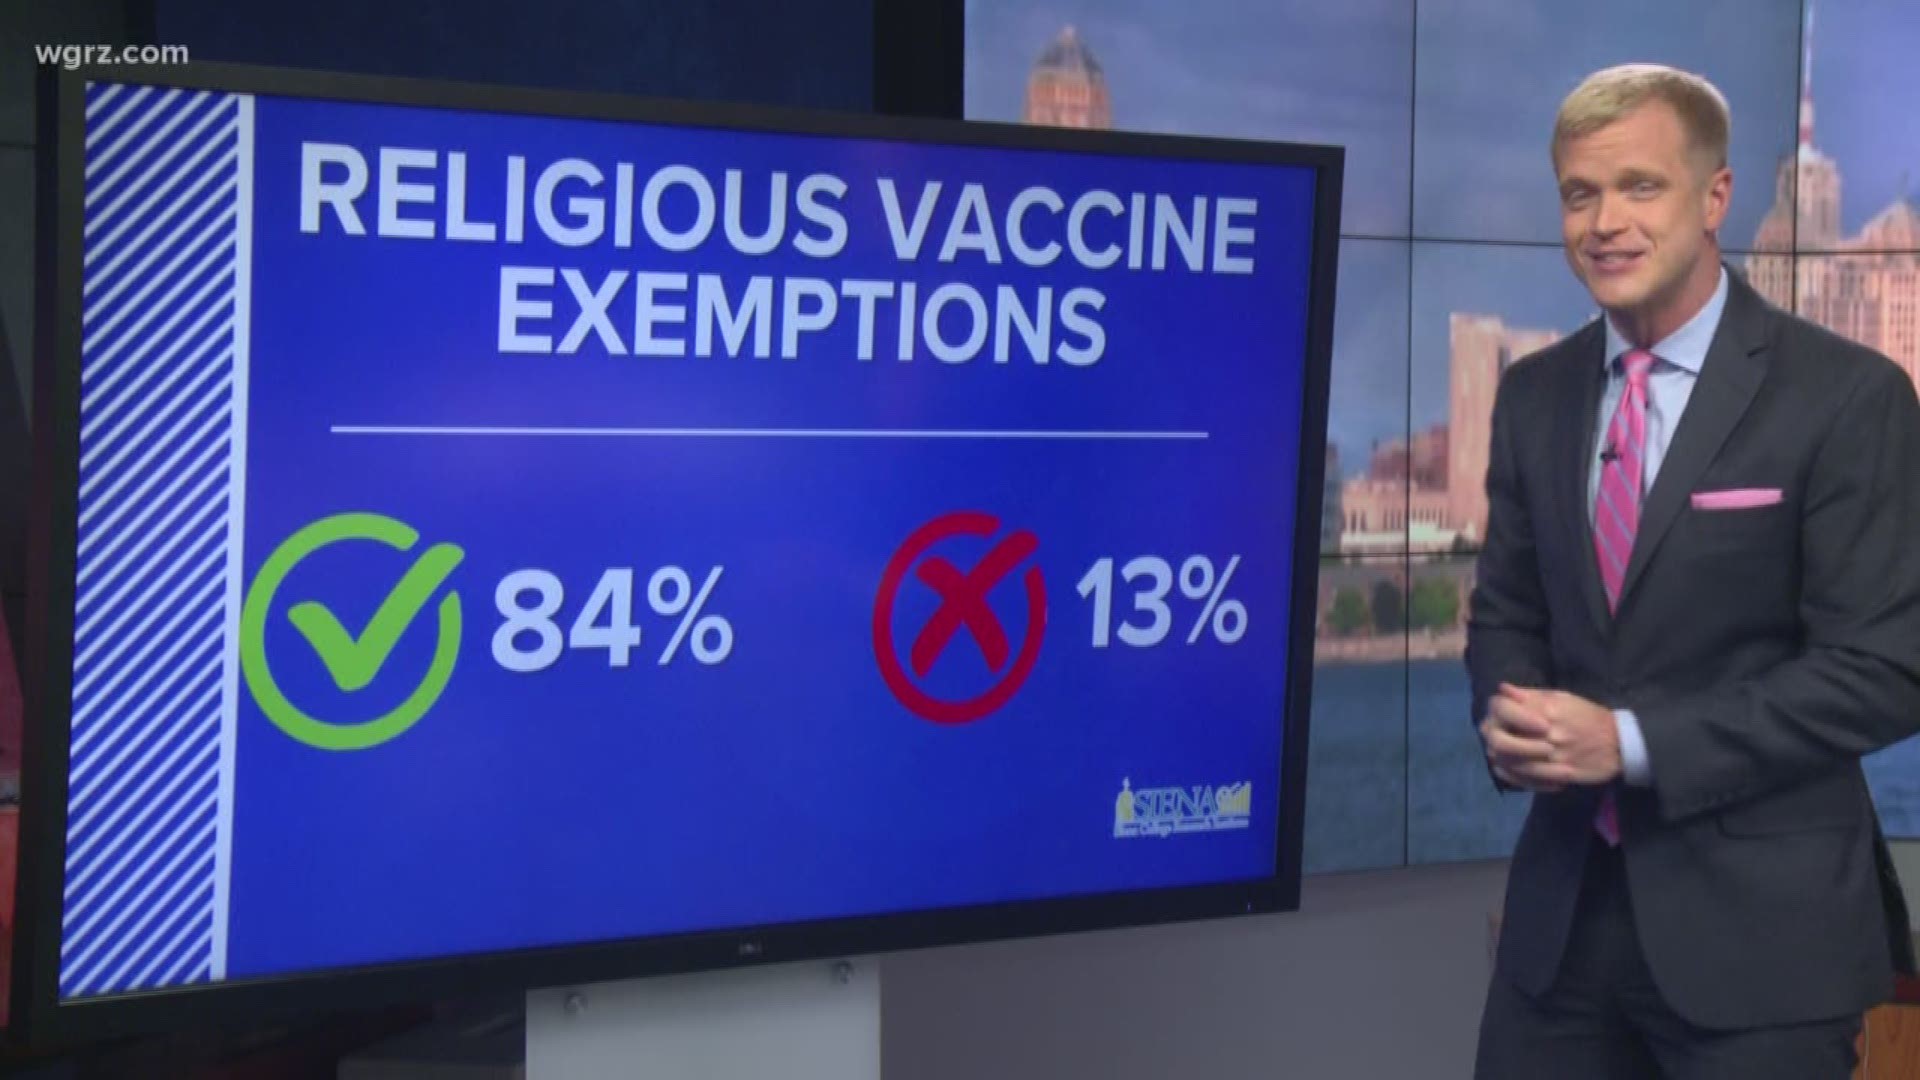 RELIGIOUS VACCINES overwhelm support to not allow religious exemptions for vaccines